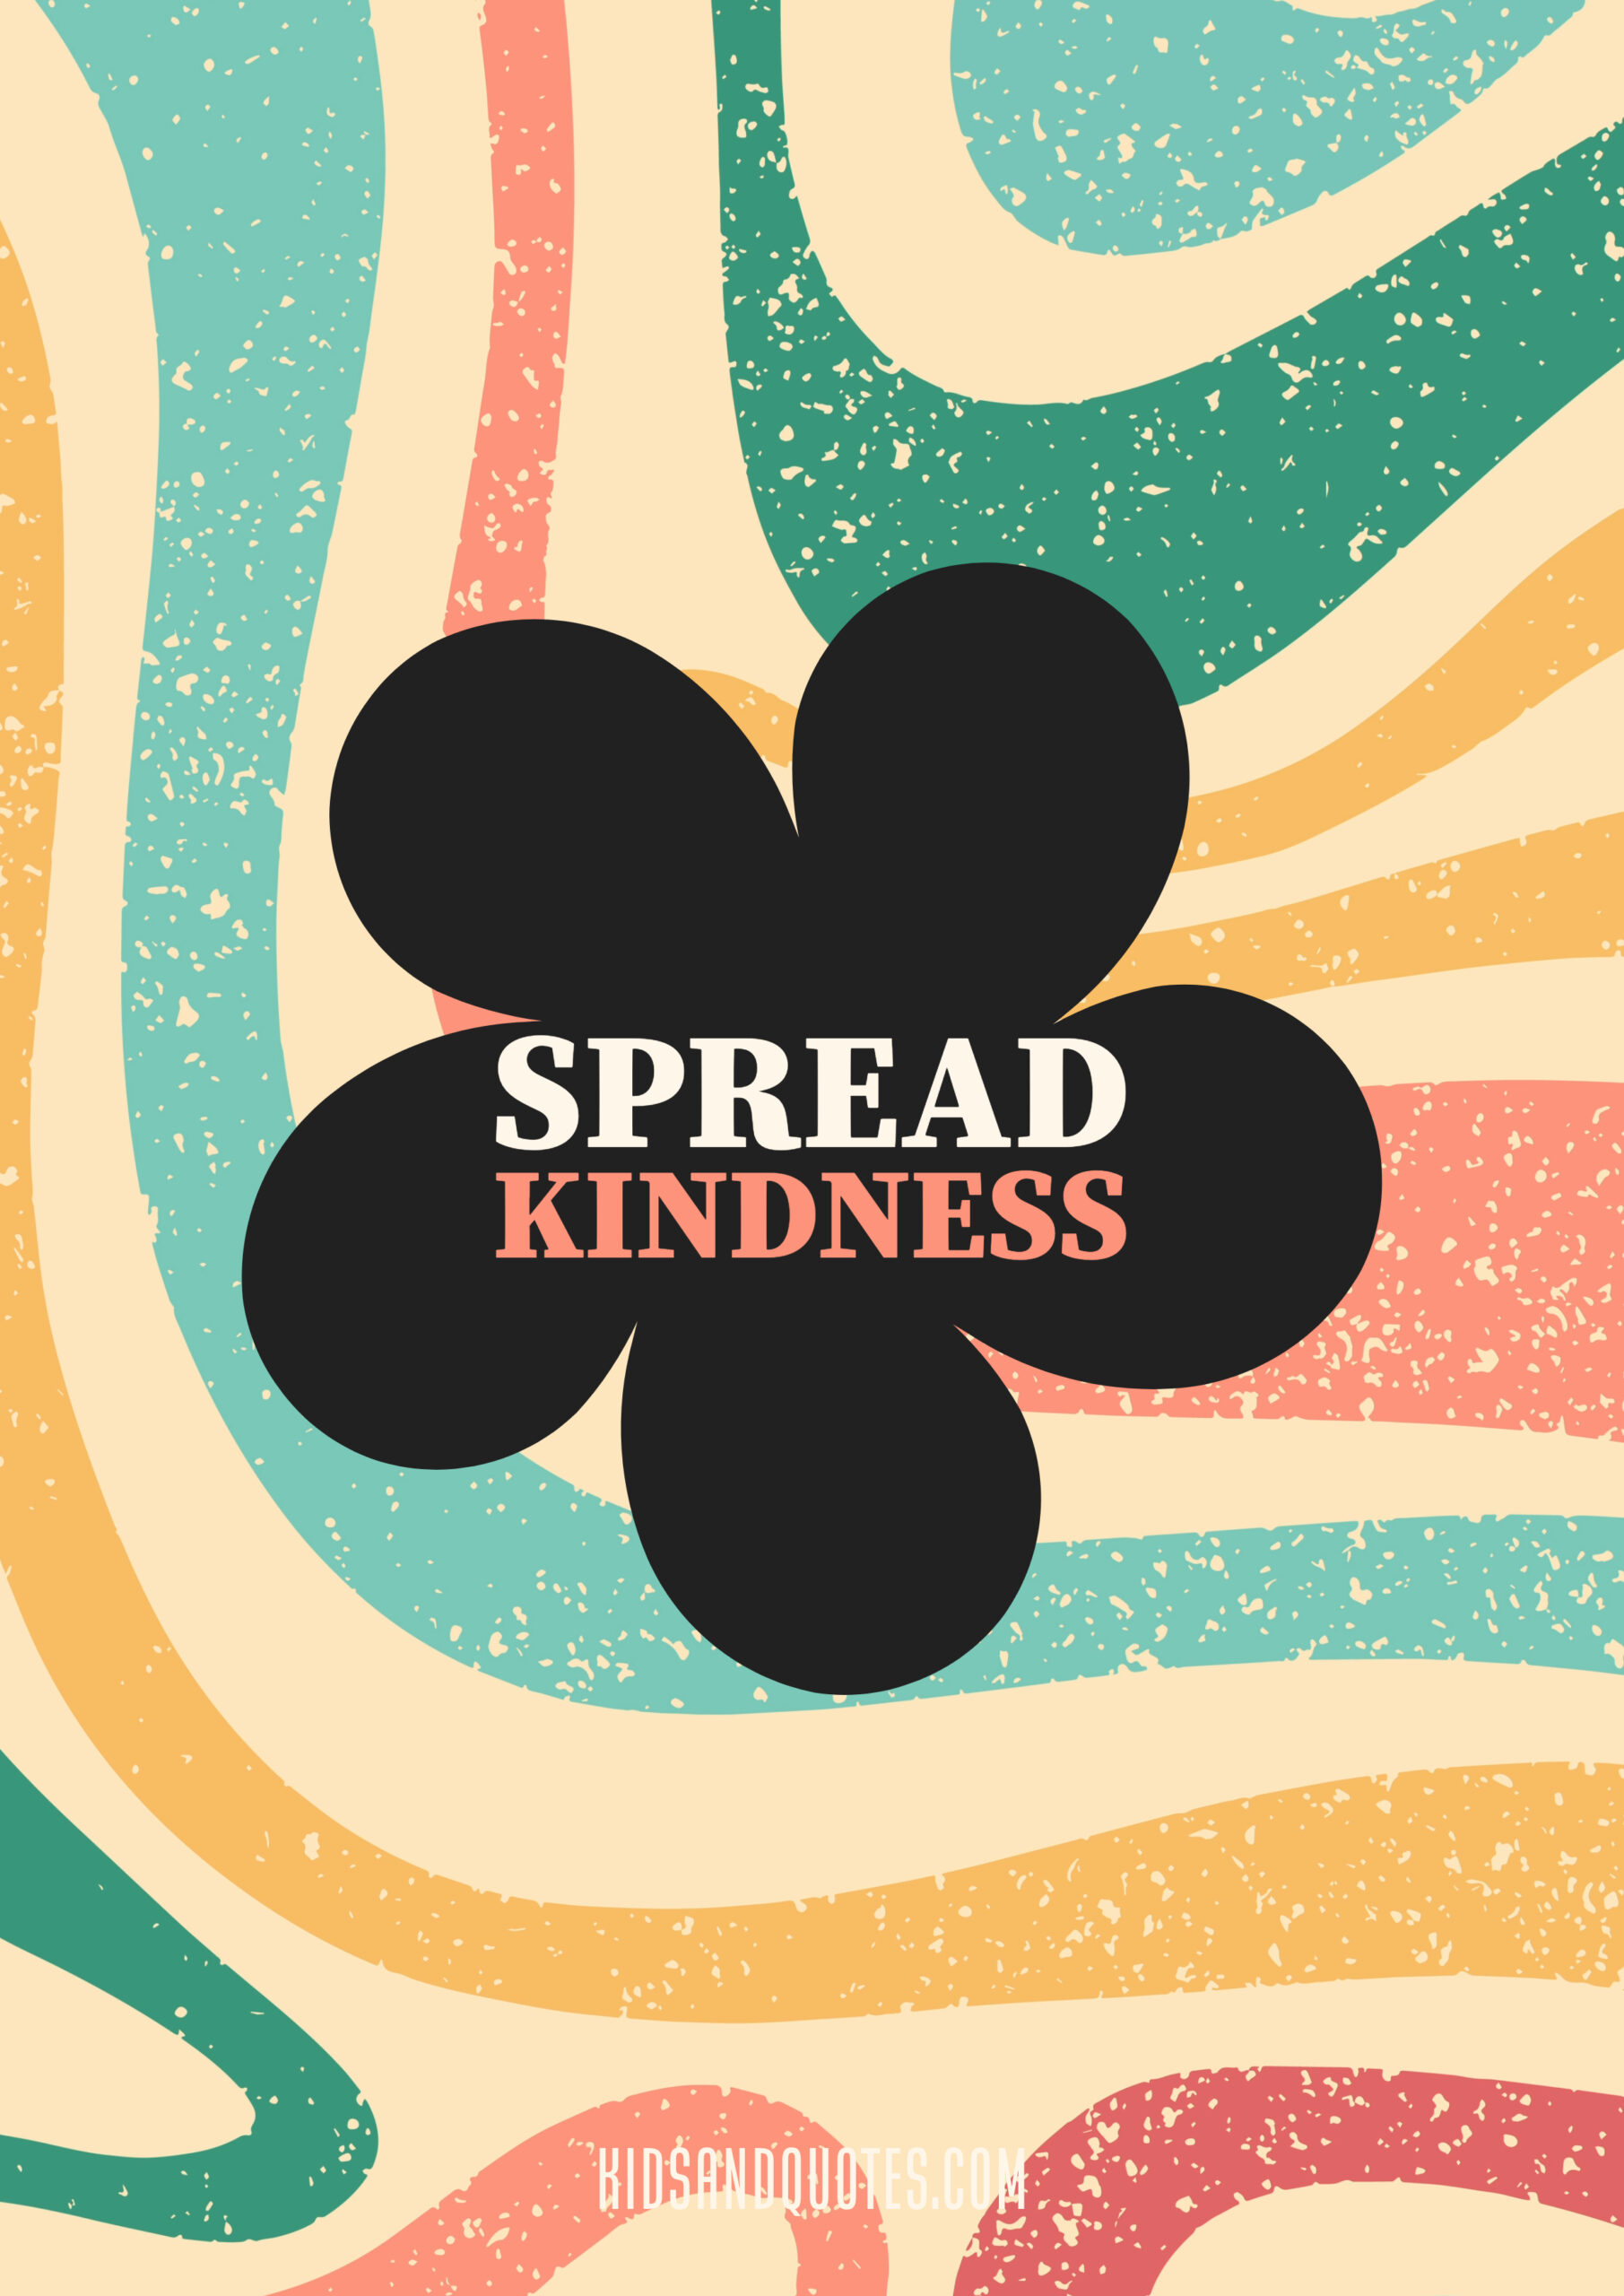 Spread kindness - a kindness poster for school